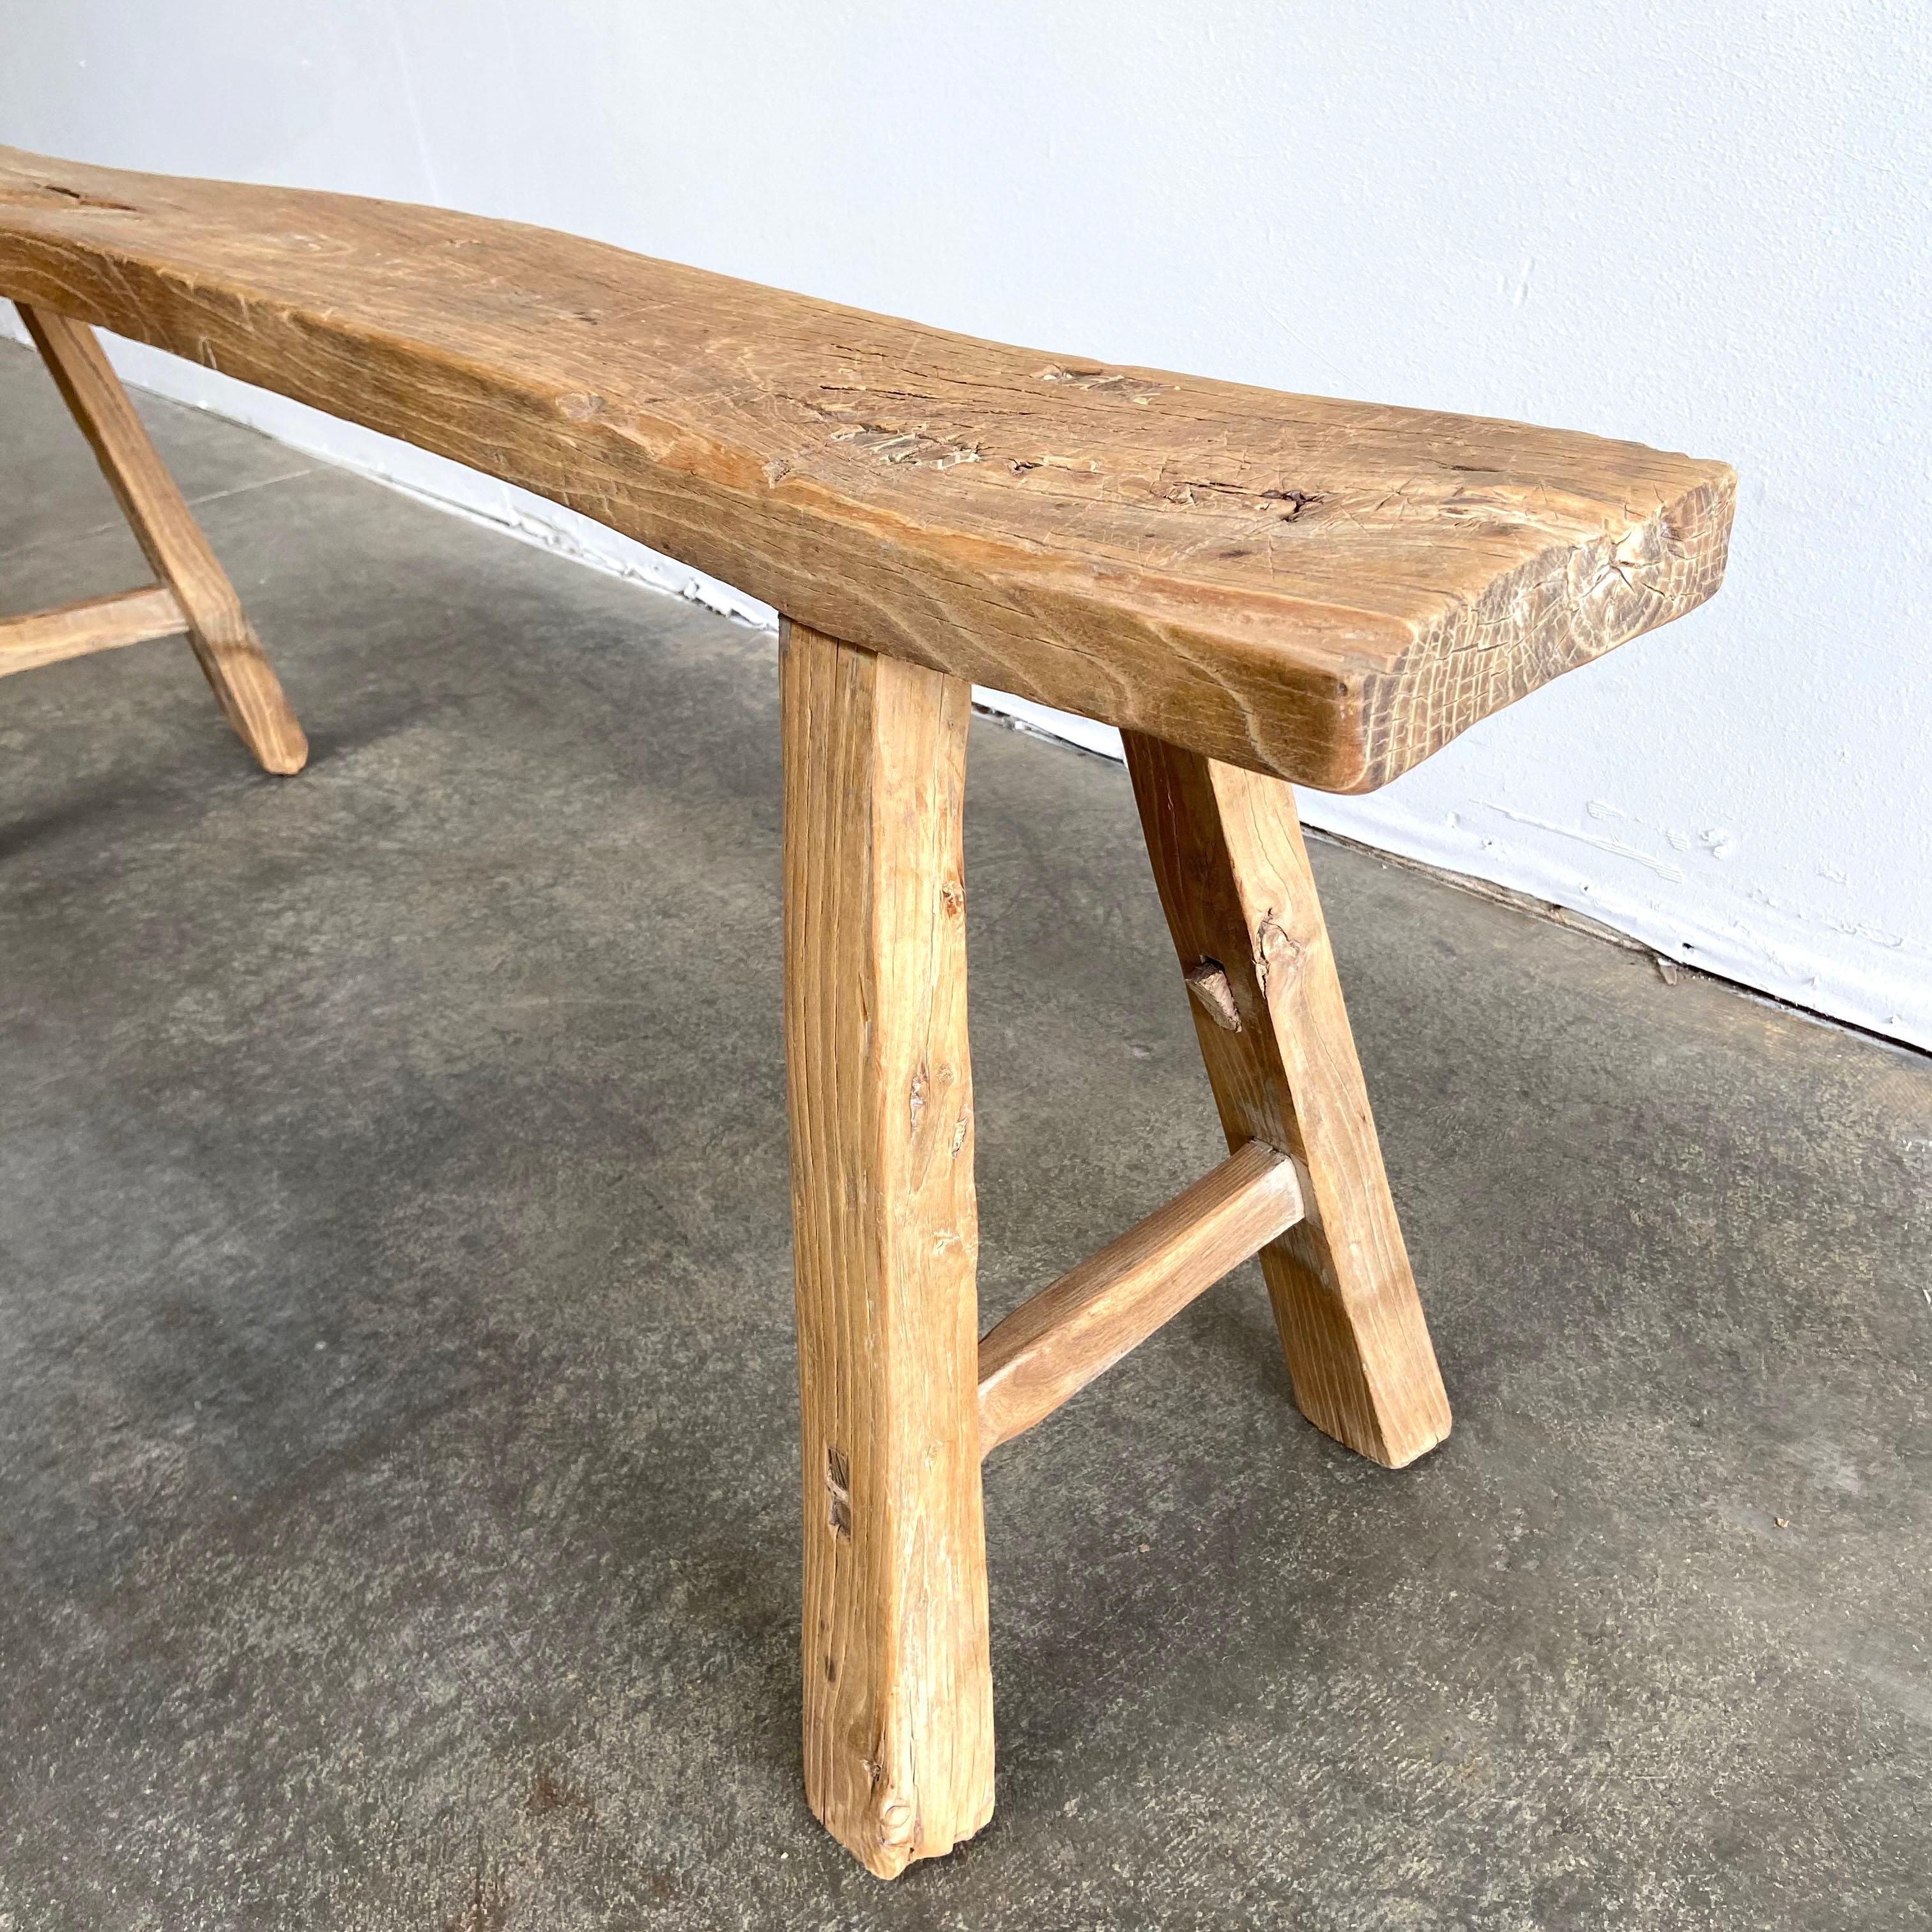 Skinny bench / vintage antique elm wood bench
These are the real vintage antique elm wood benches! Beautiful antique patina, with weathering and age, these are solid and sturdy ready for daily use, use as as a table behind a sofa, stool, coffee